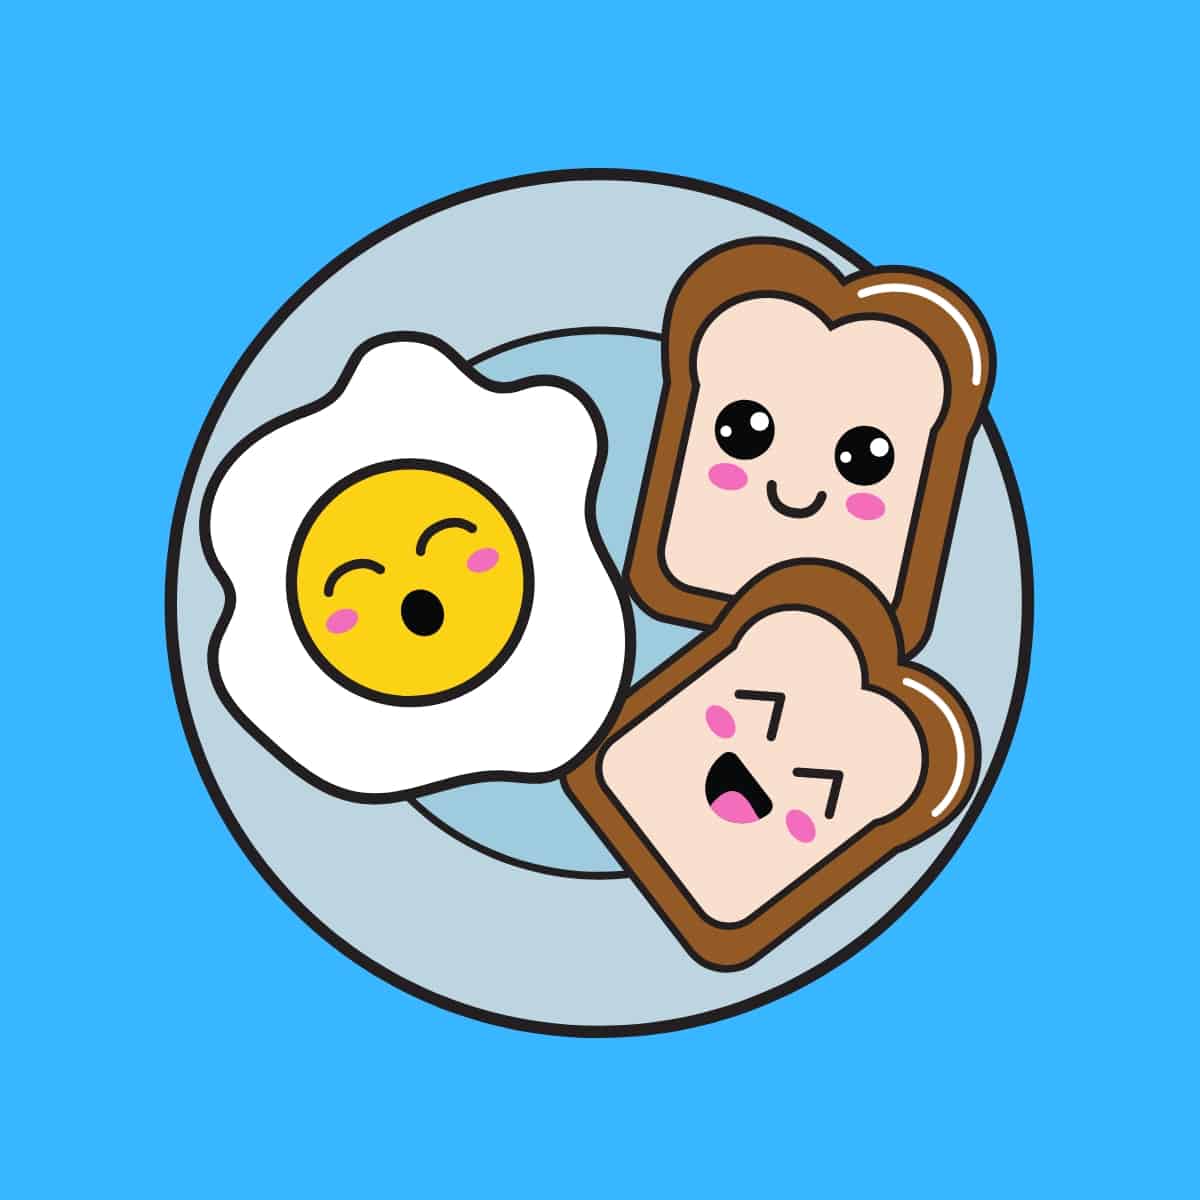 Cartoon graphic of a plate with an egg and two pieces of toast, all with smiling faces on a blue background.